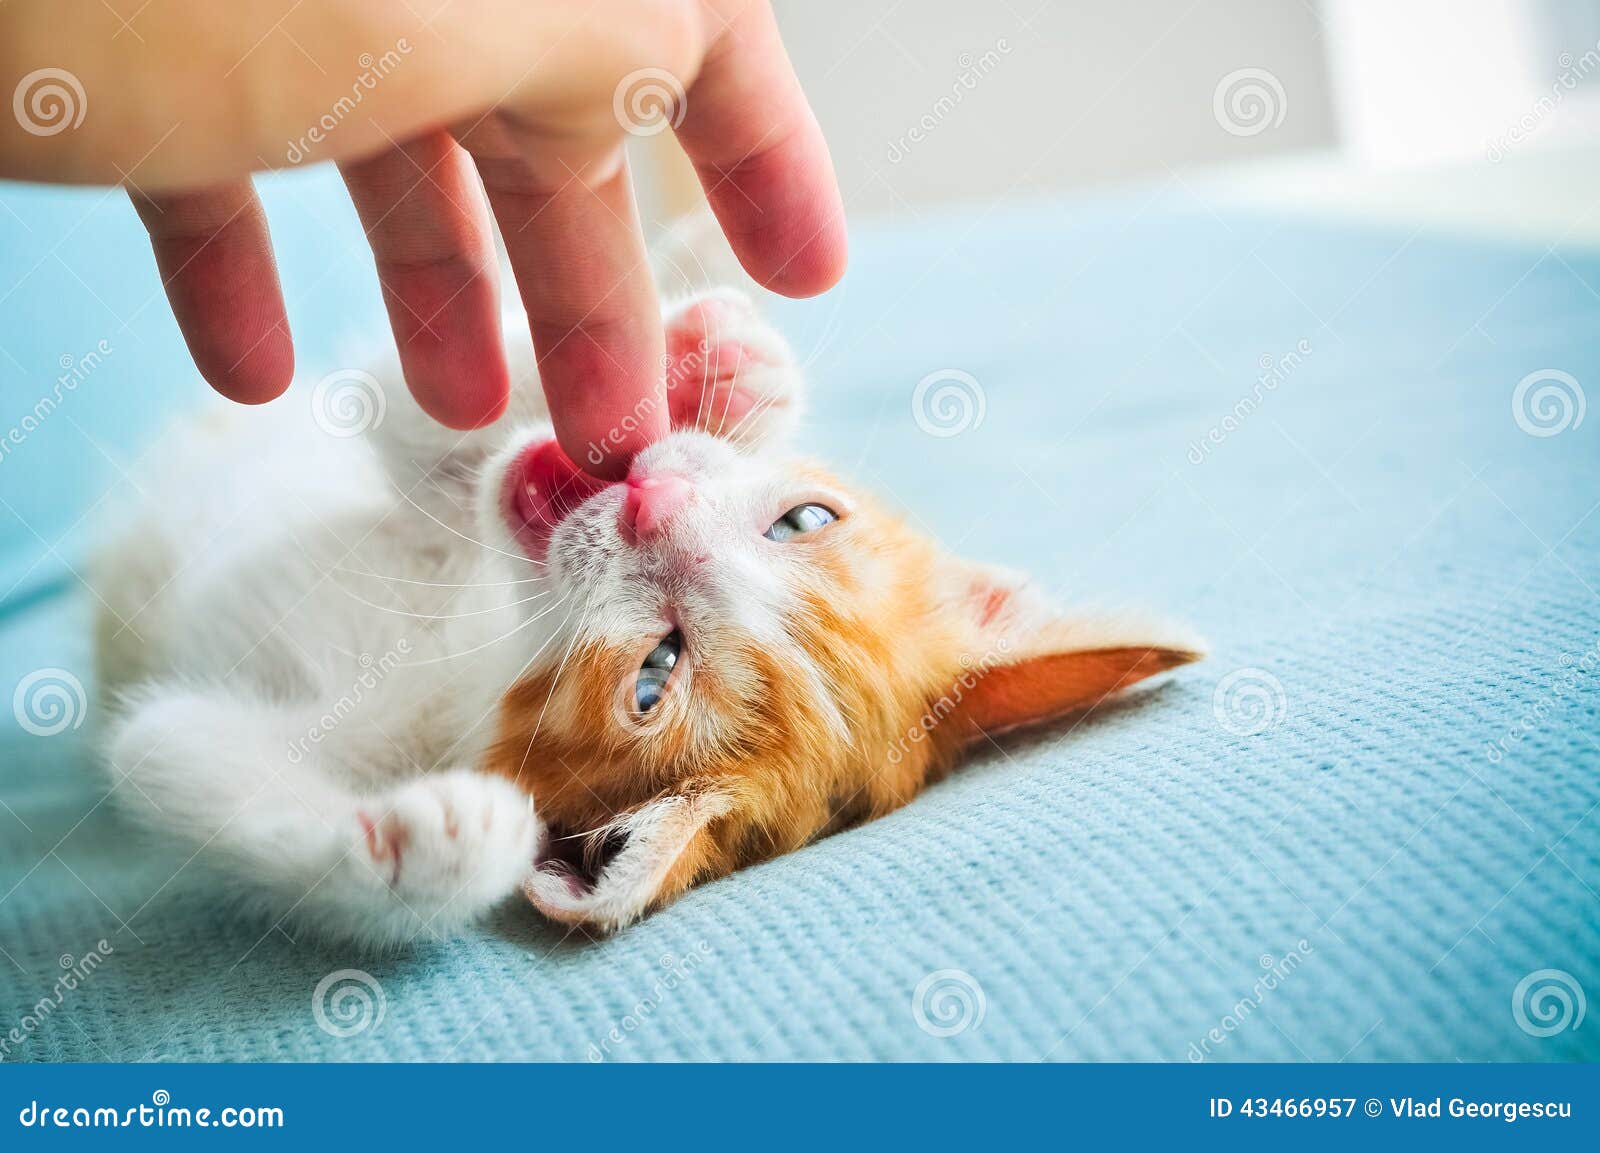 Adorable Baby Cat With Blue Eyes Stock Image Image Of Beautiful Animal